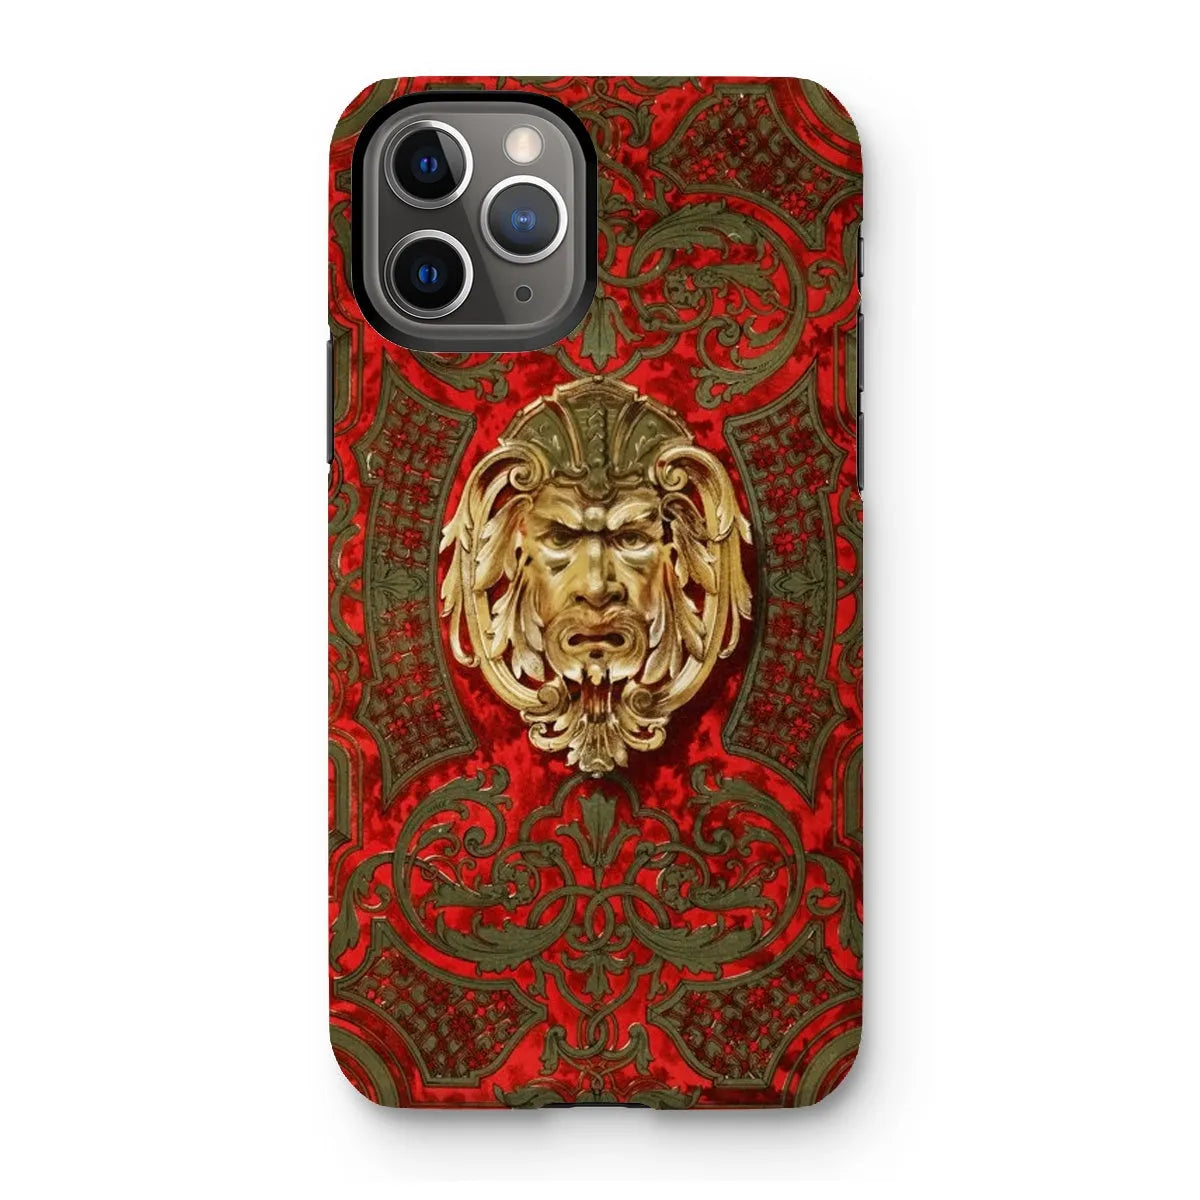 Panel In Buhl Victorian Art Phone Case - Matthew Digby Wyatt - Iphone 11 Pro / Matte - Mobile Phone Cases - Aesthetic